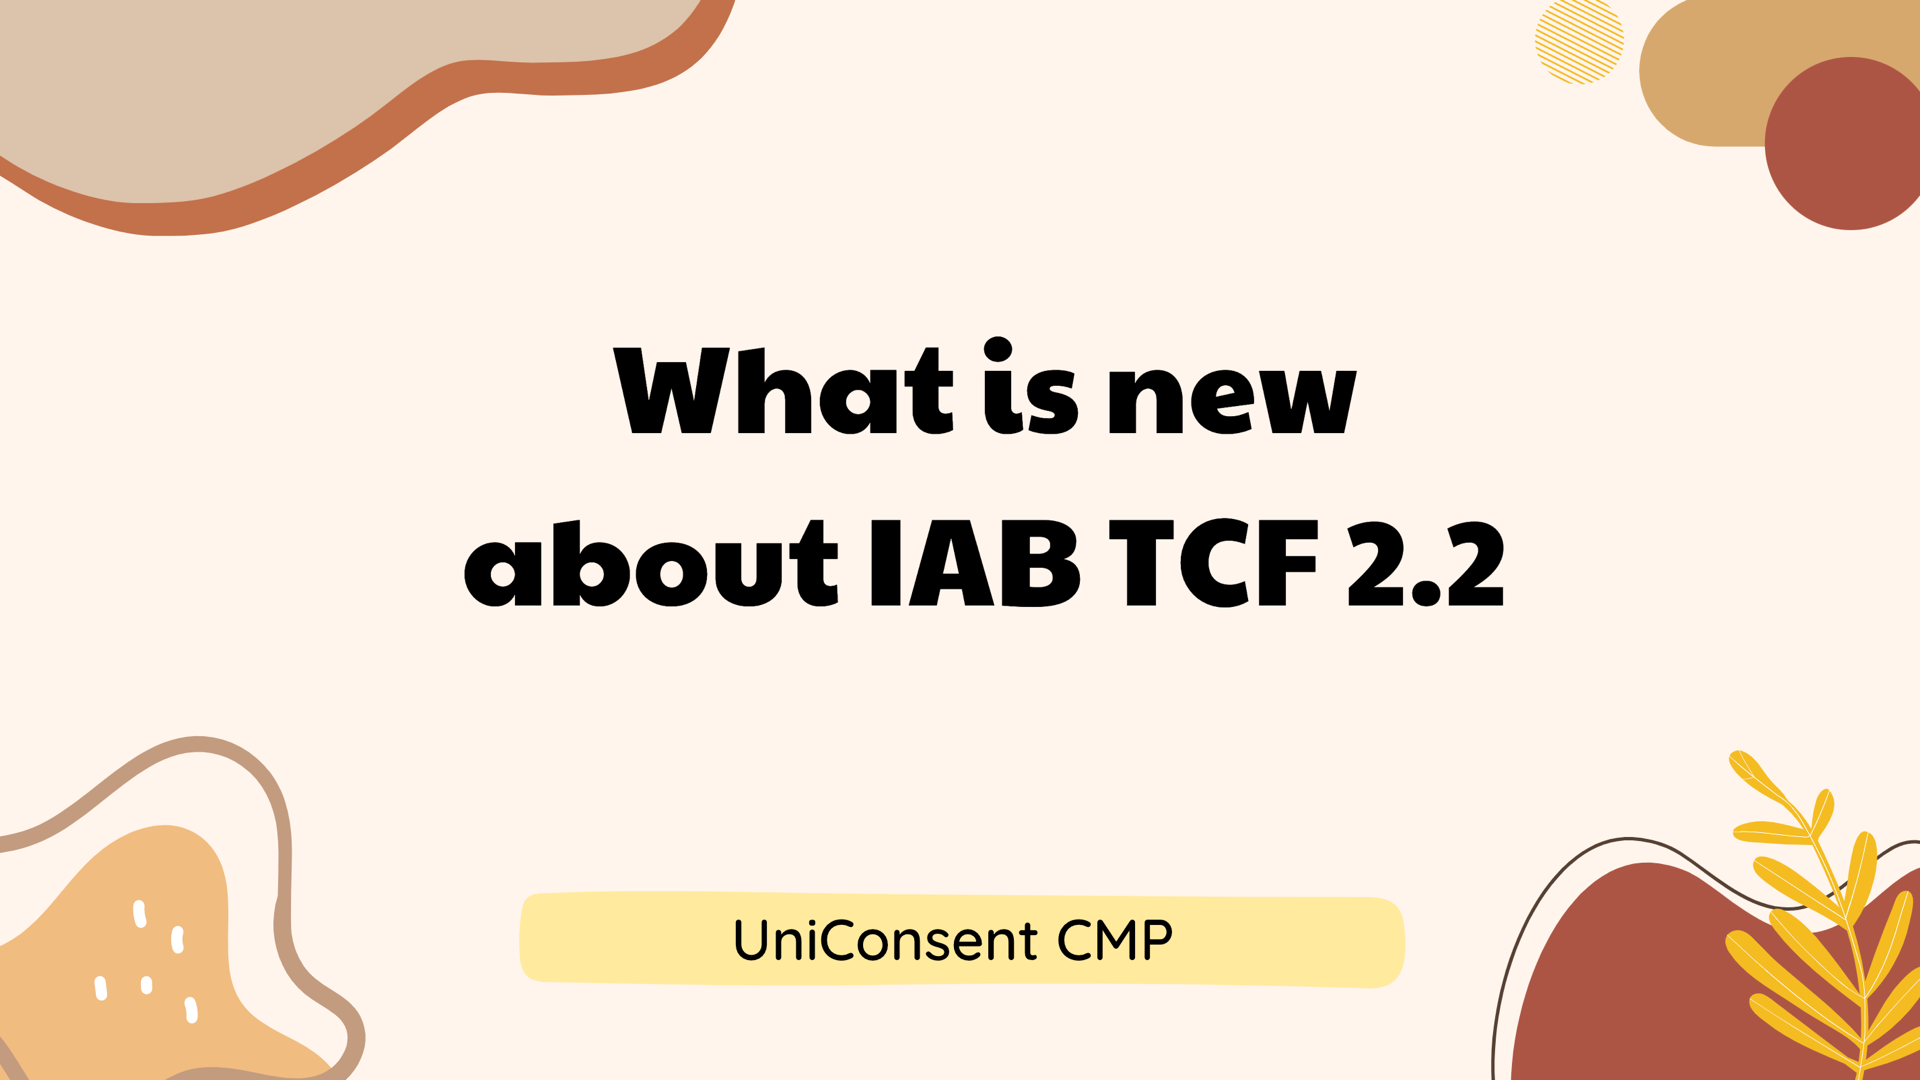 IAB TCF 2.2: What Are the Changes?